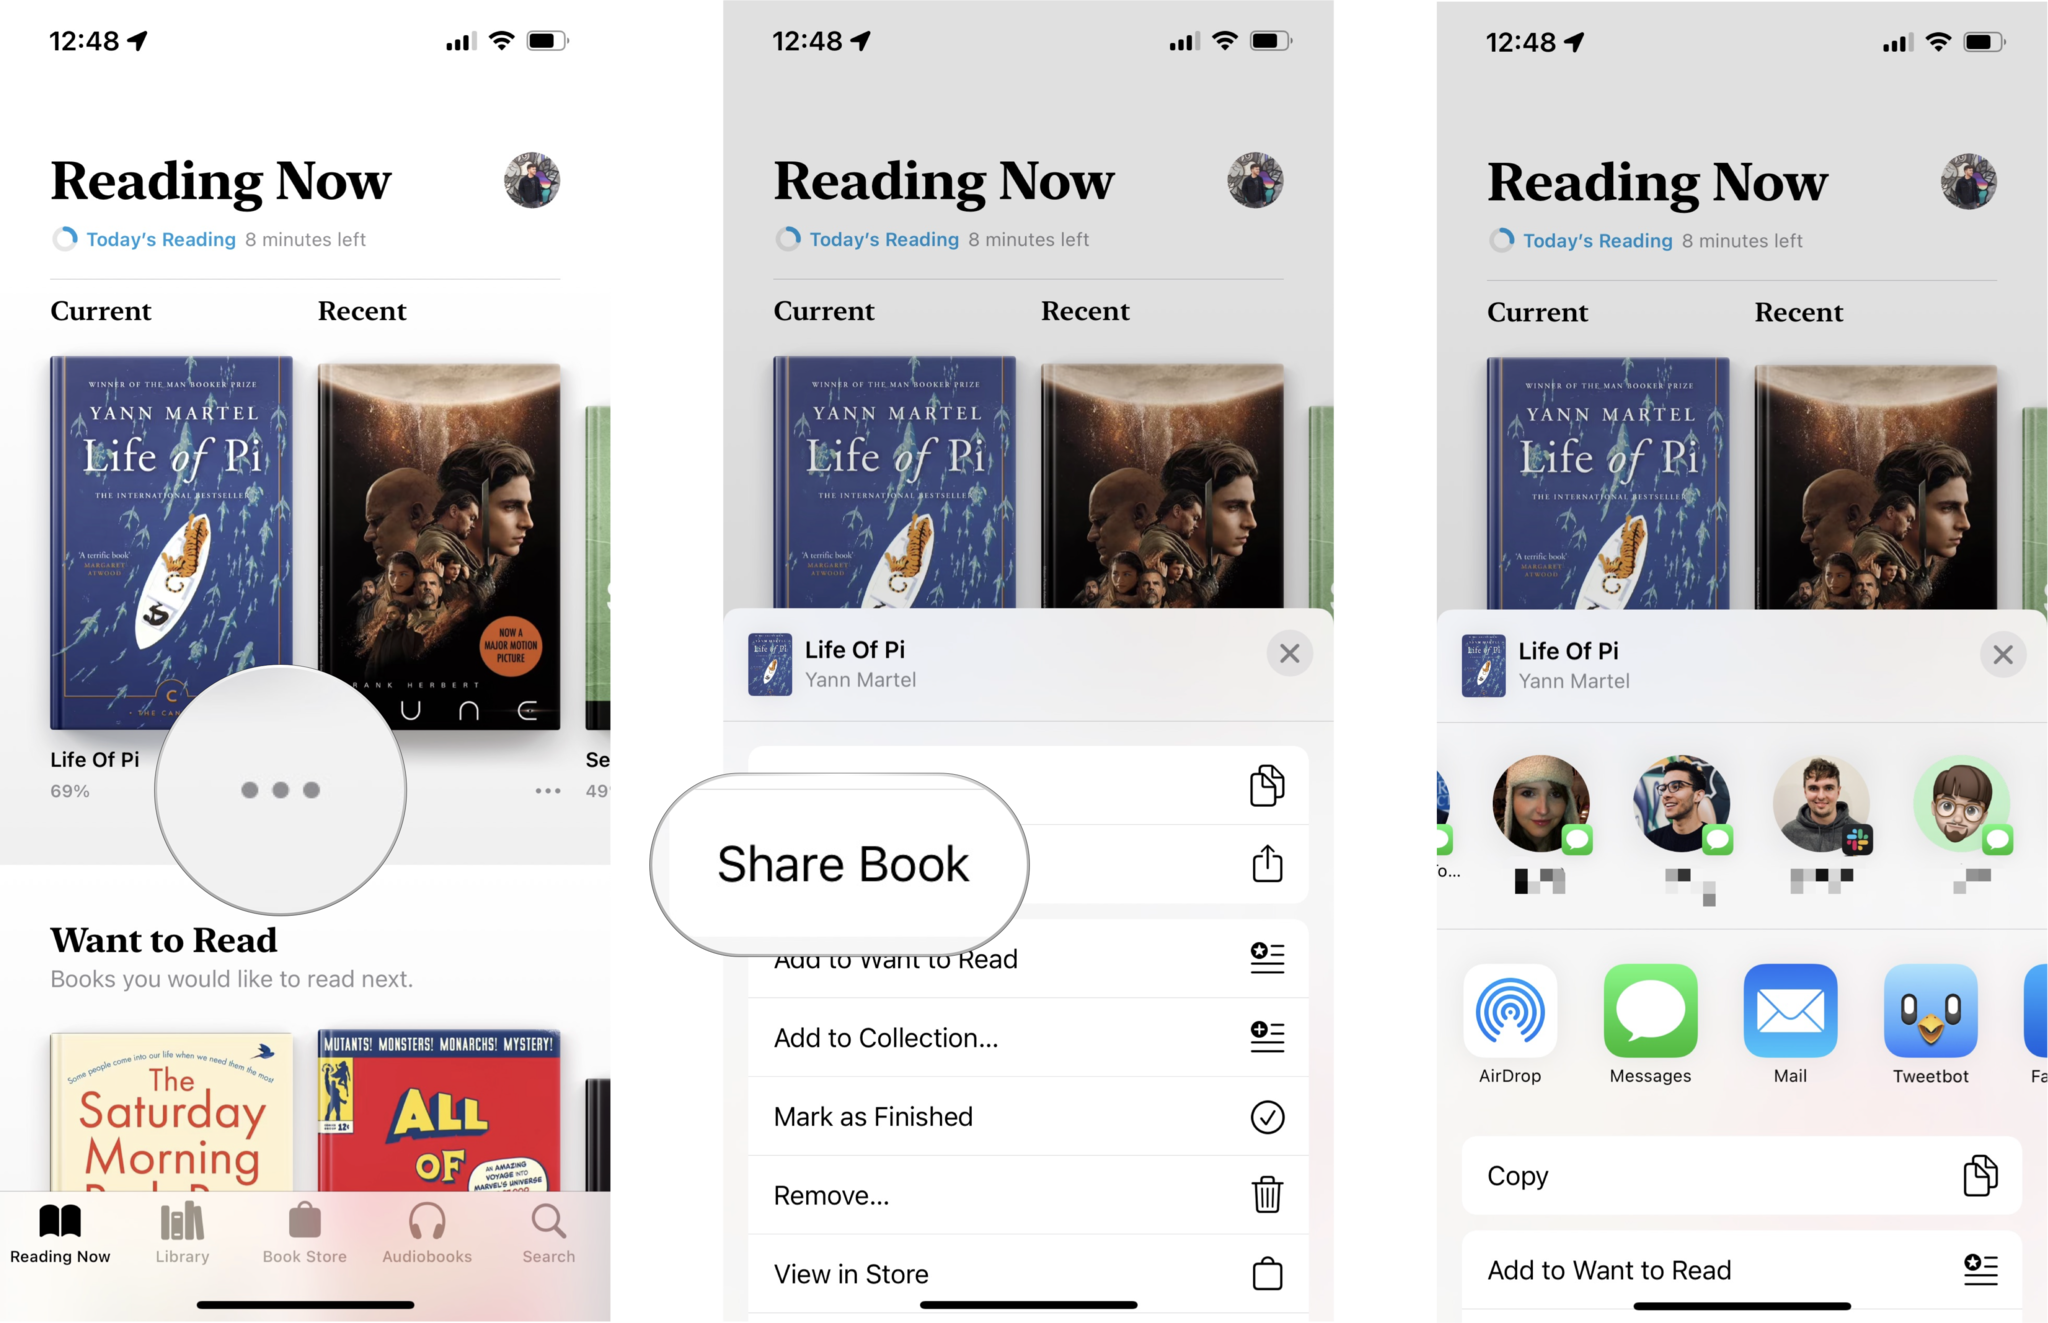 How to share a link to a book in Apple Books: Tap the more button, tap Share Book, tap the recipient or sharing method